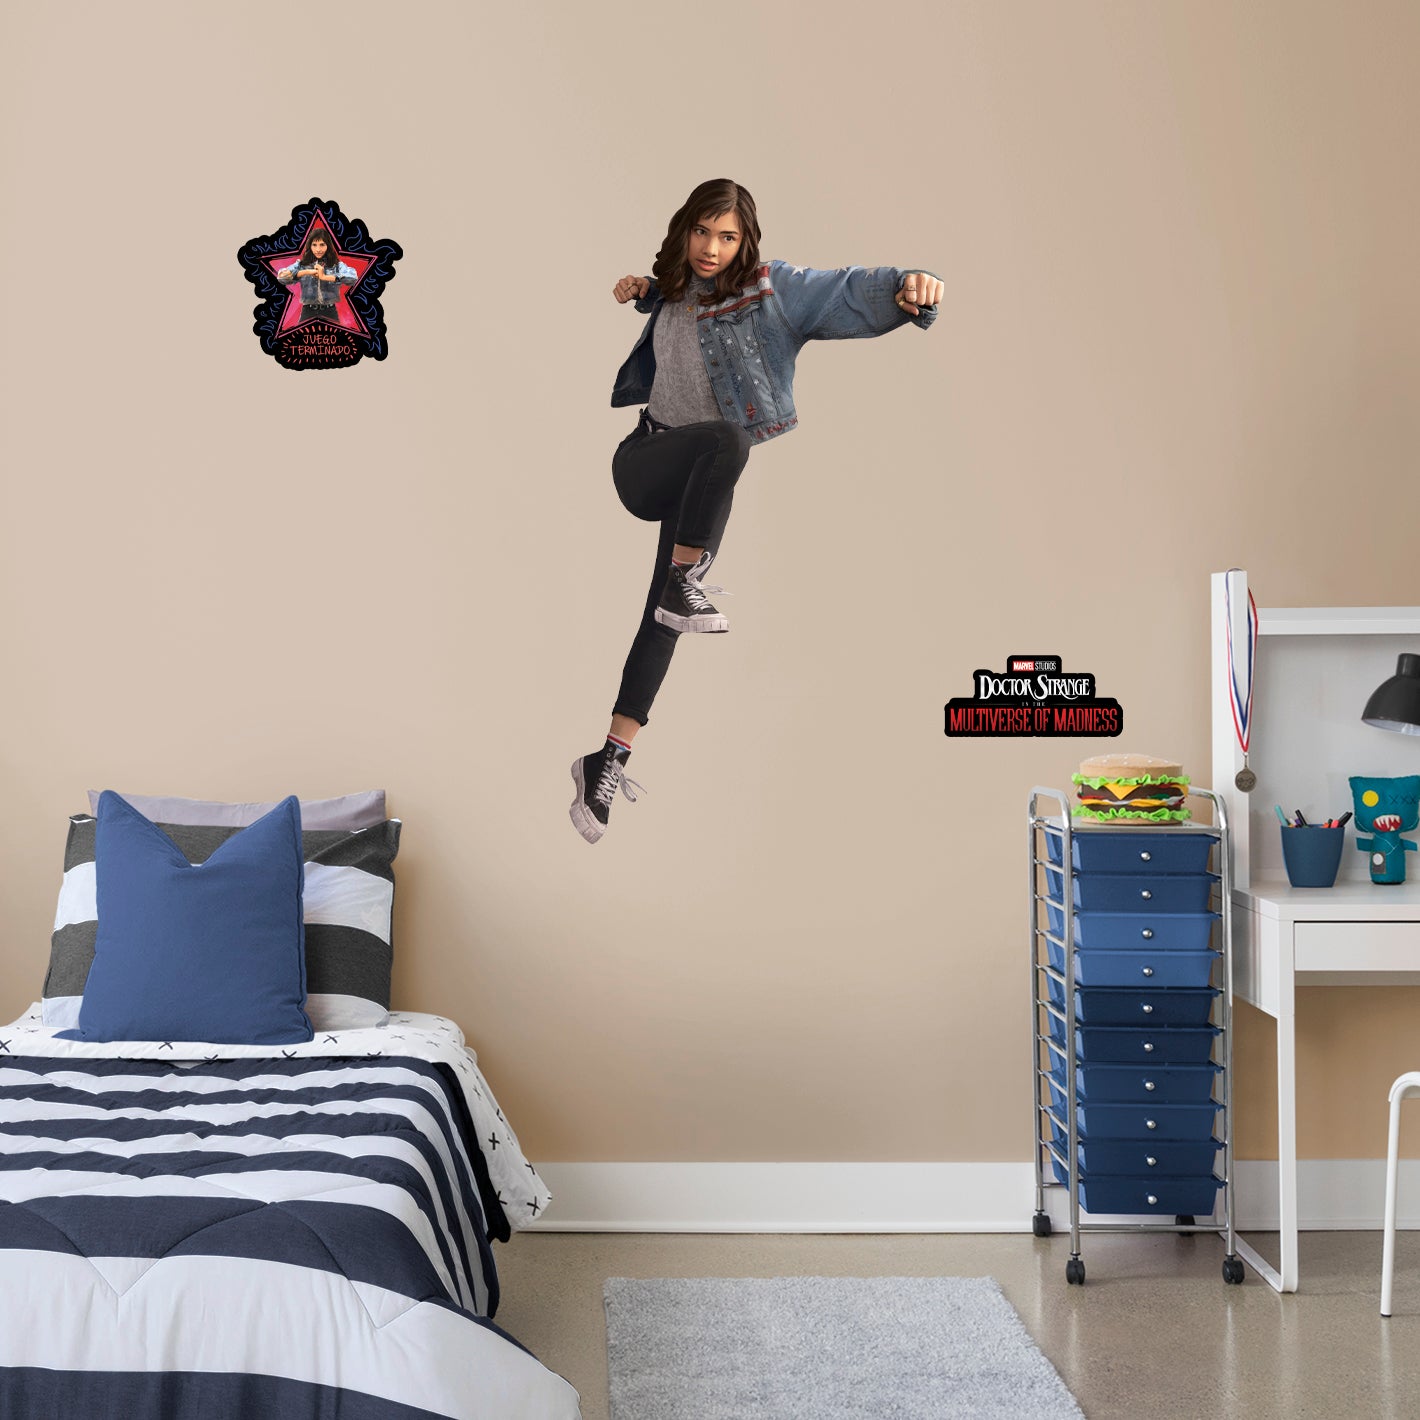 Doctor Strange 2: In the Multiverse of Madness: America Chavez RealBig - Officially Licensed Marvel Removable Adhesive Decal